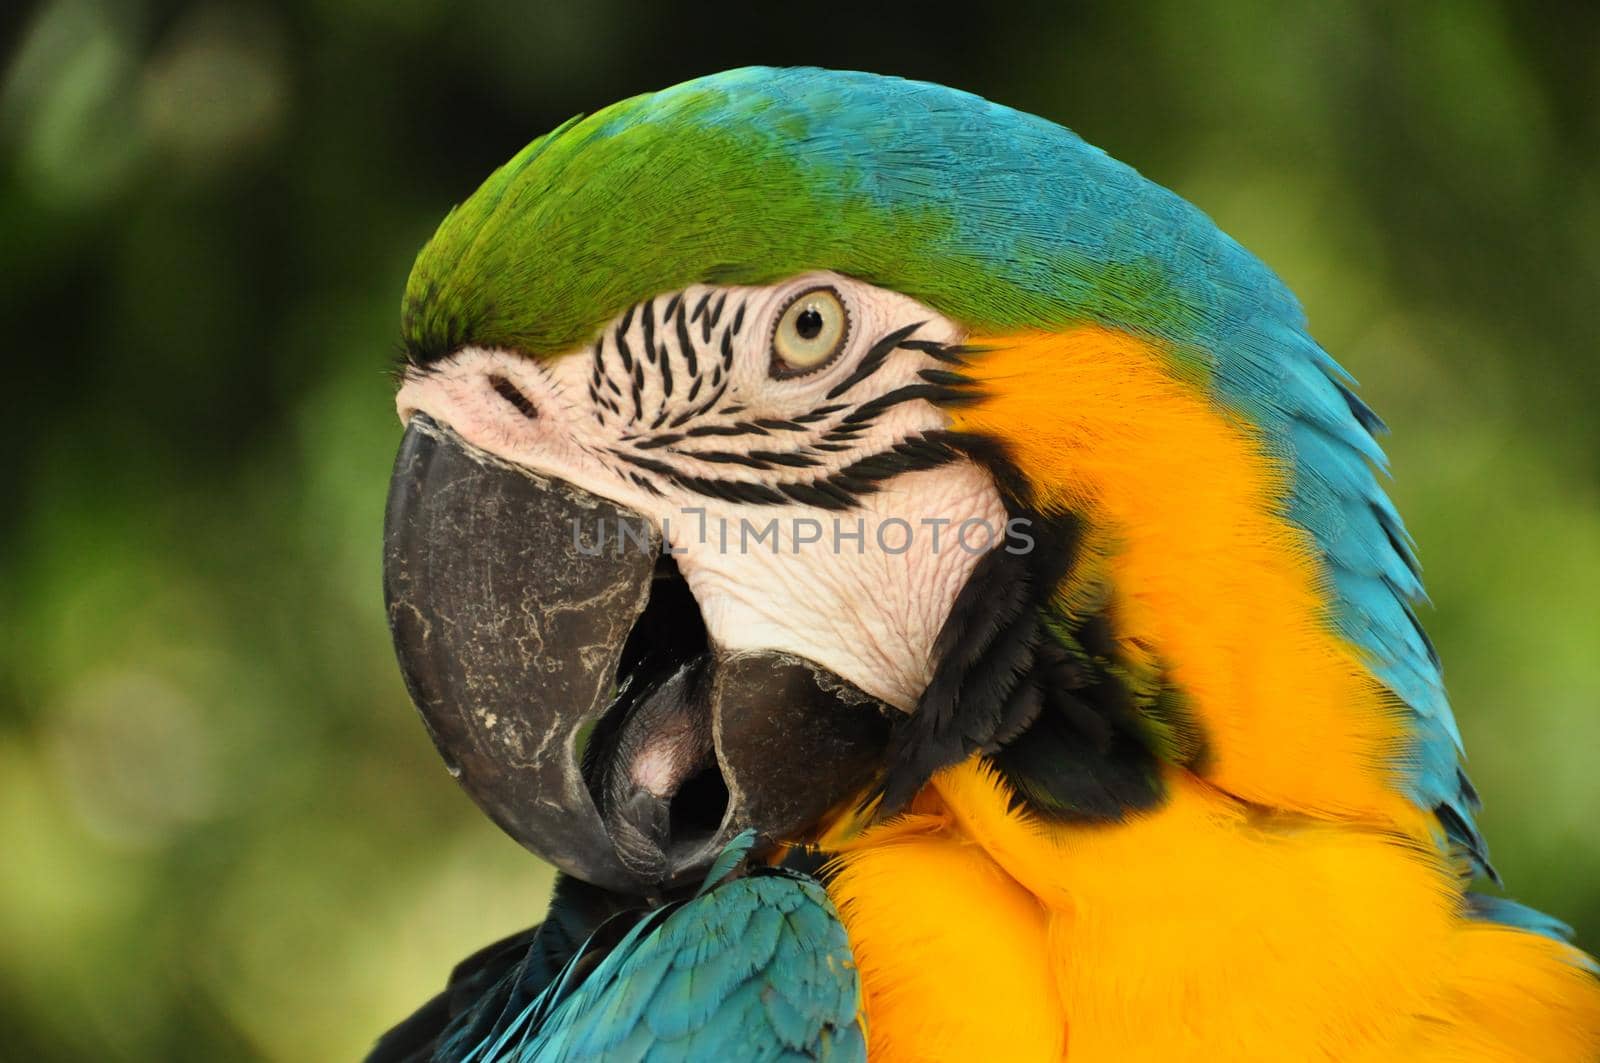 Closeup of multicolored macaw, Closeup shot of beautiful blue and yellow macaw bird in wild nature